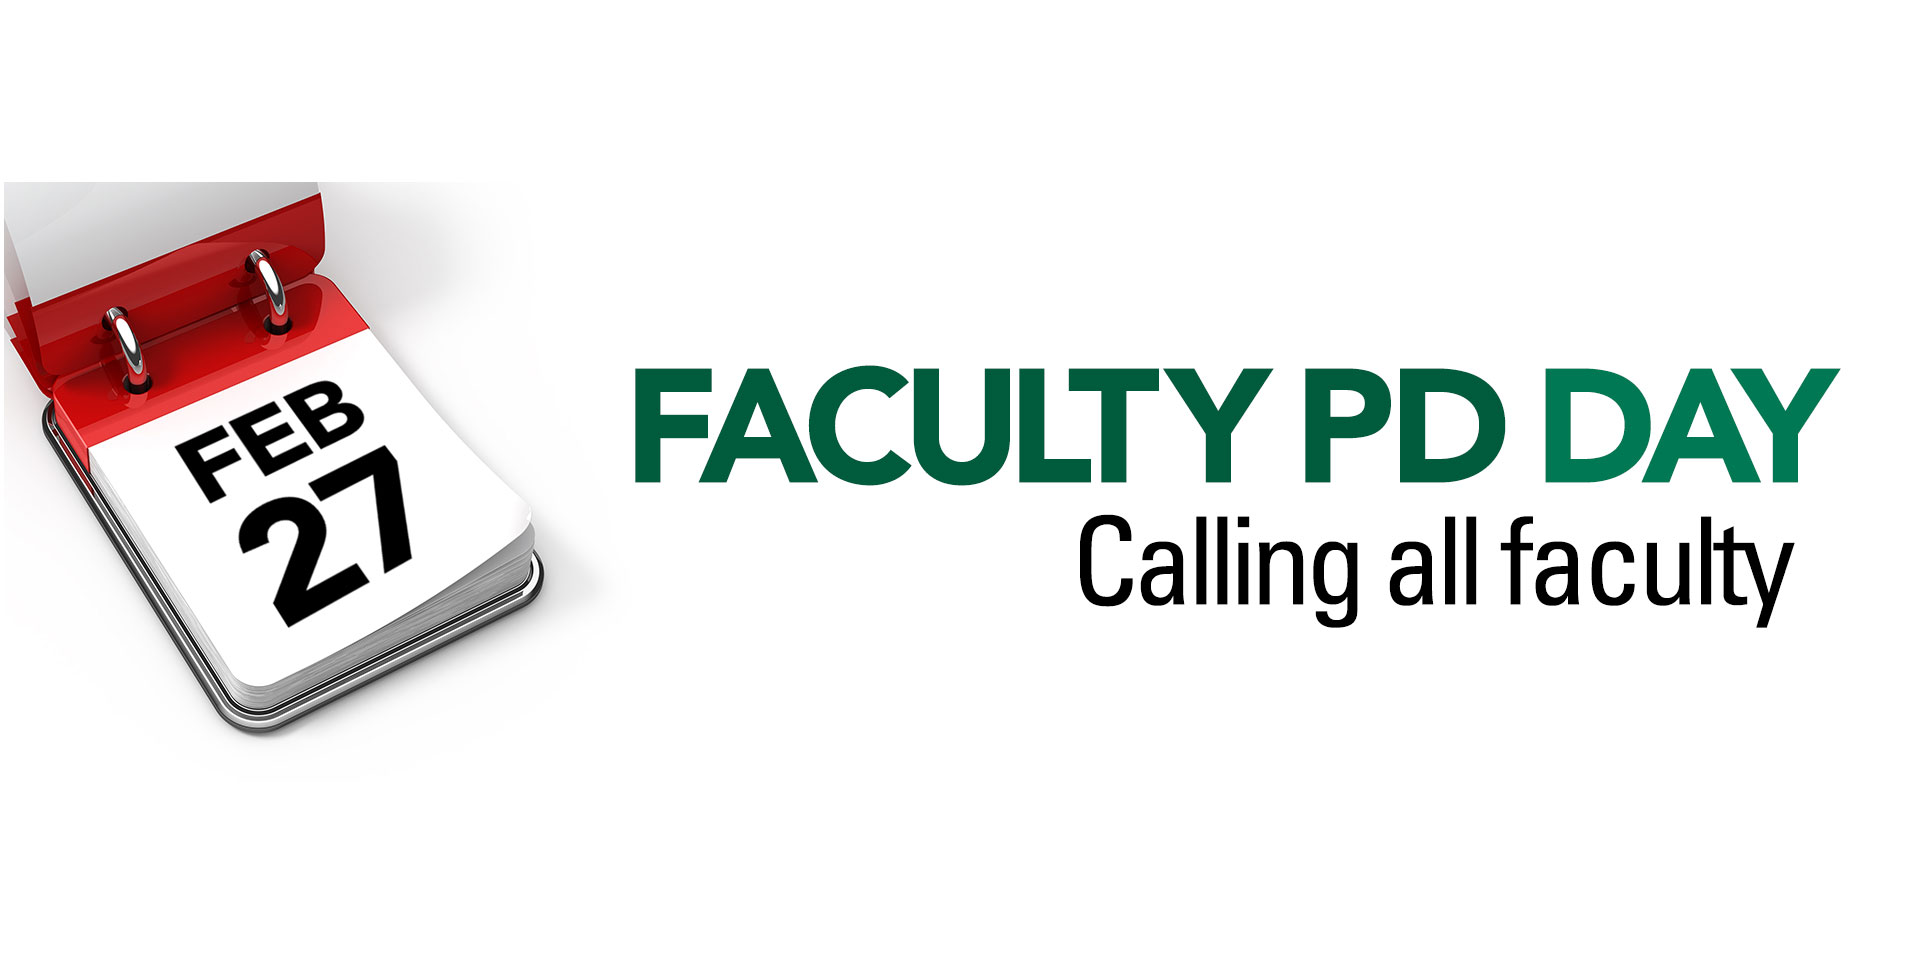 Faculty PD DAY Banner with event date of February 27th